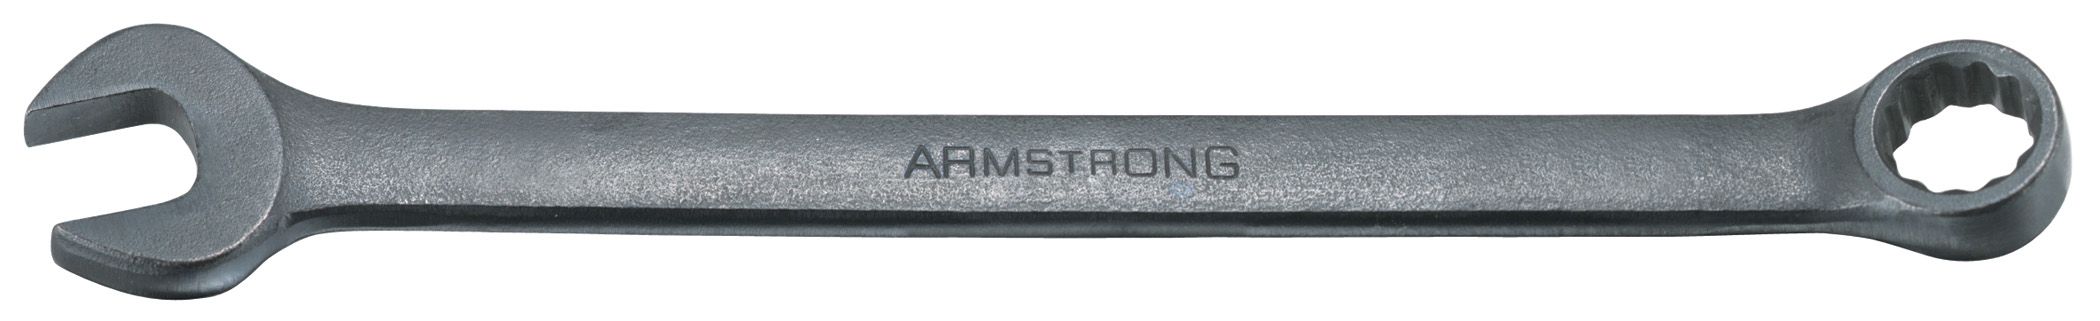 Armstrong 7/8 in. 12 pt. Black Oxide Long Combination Wrench